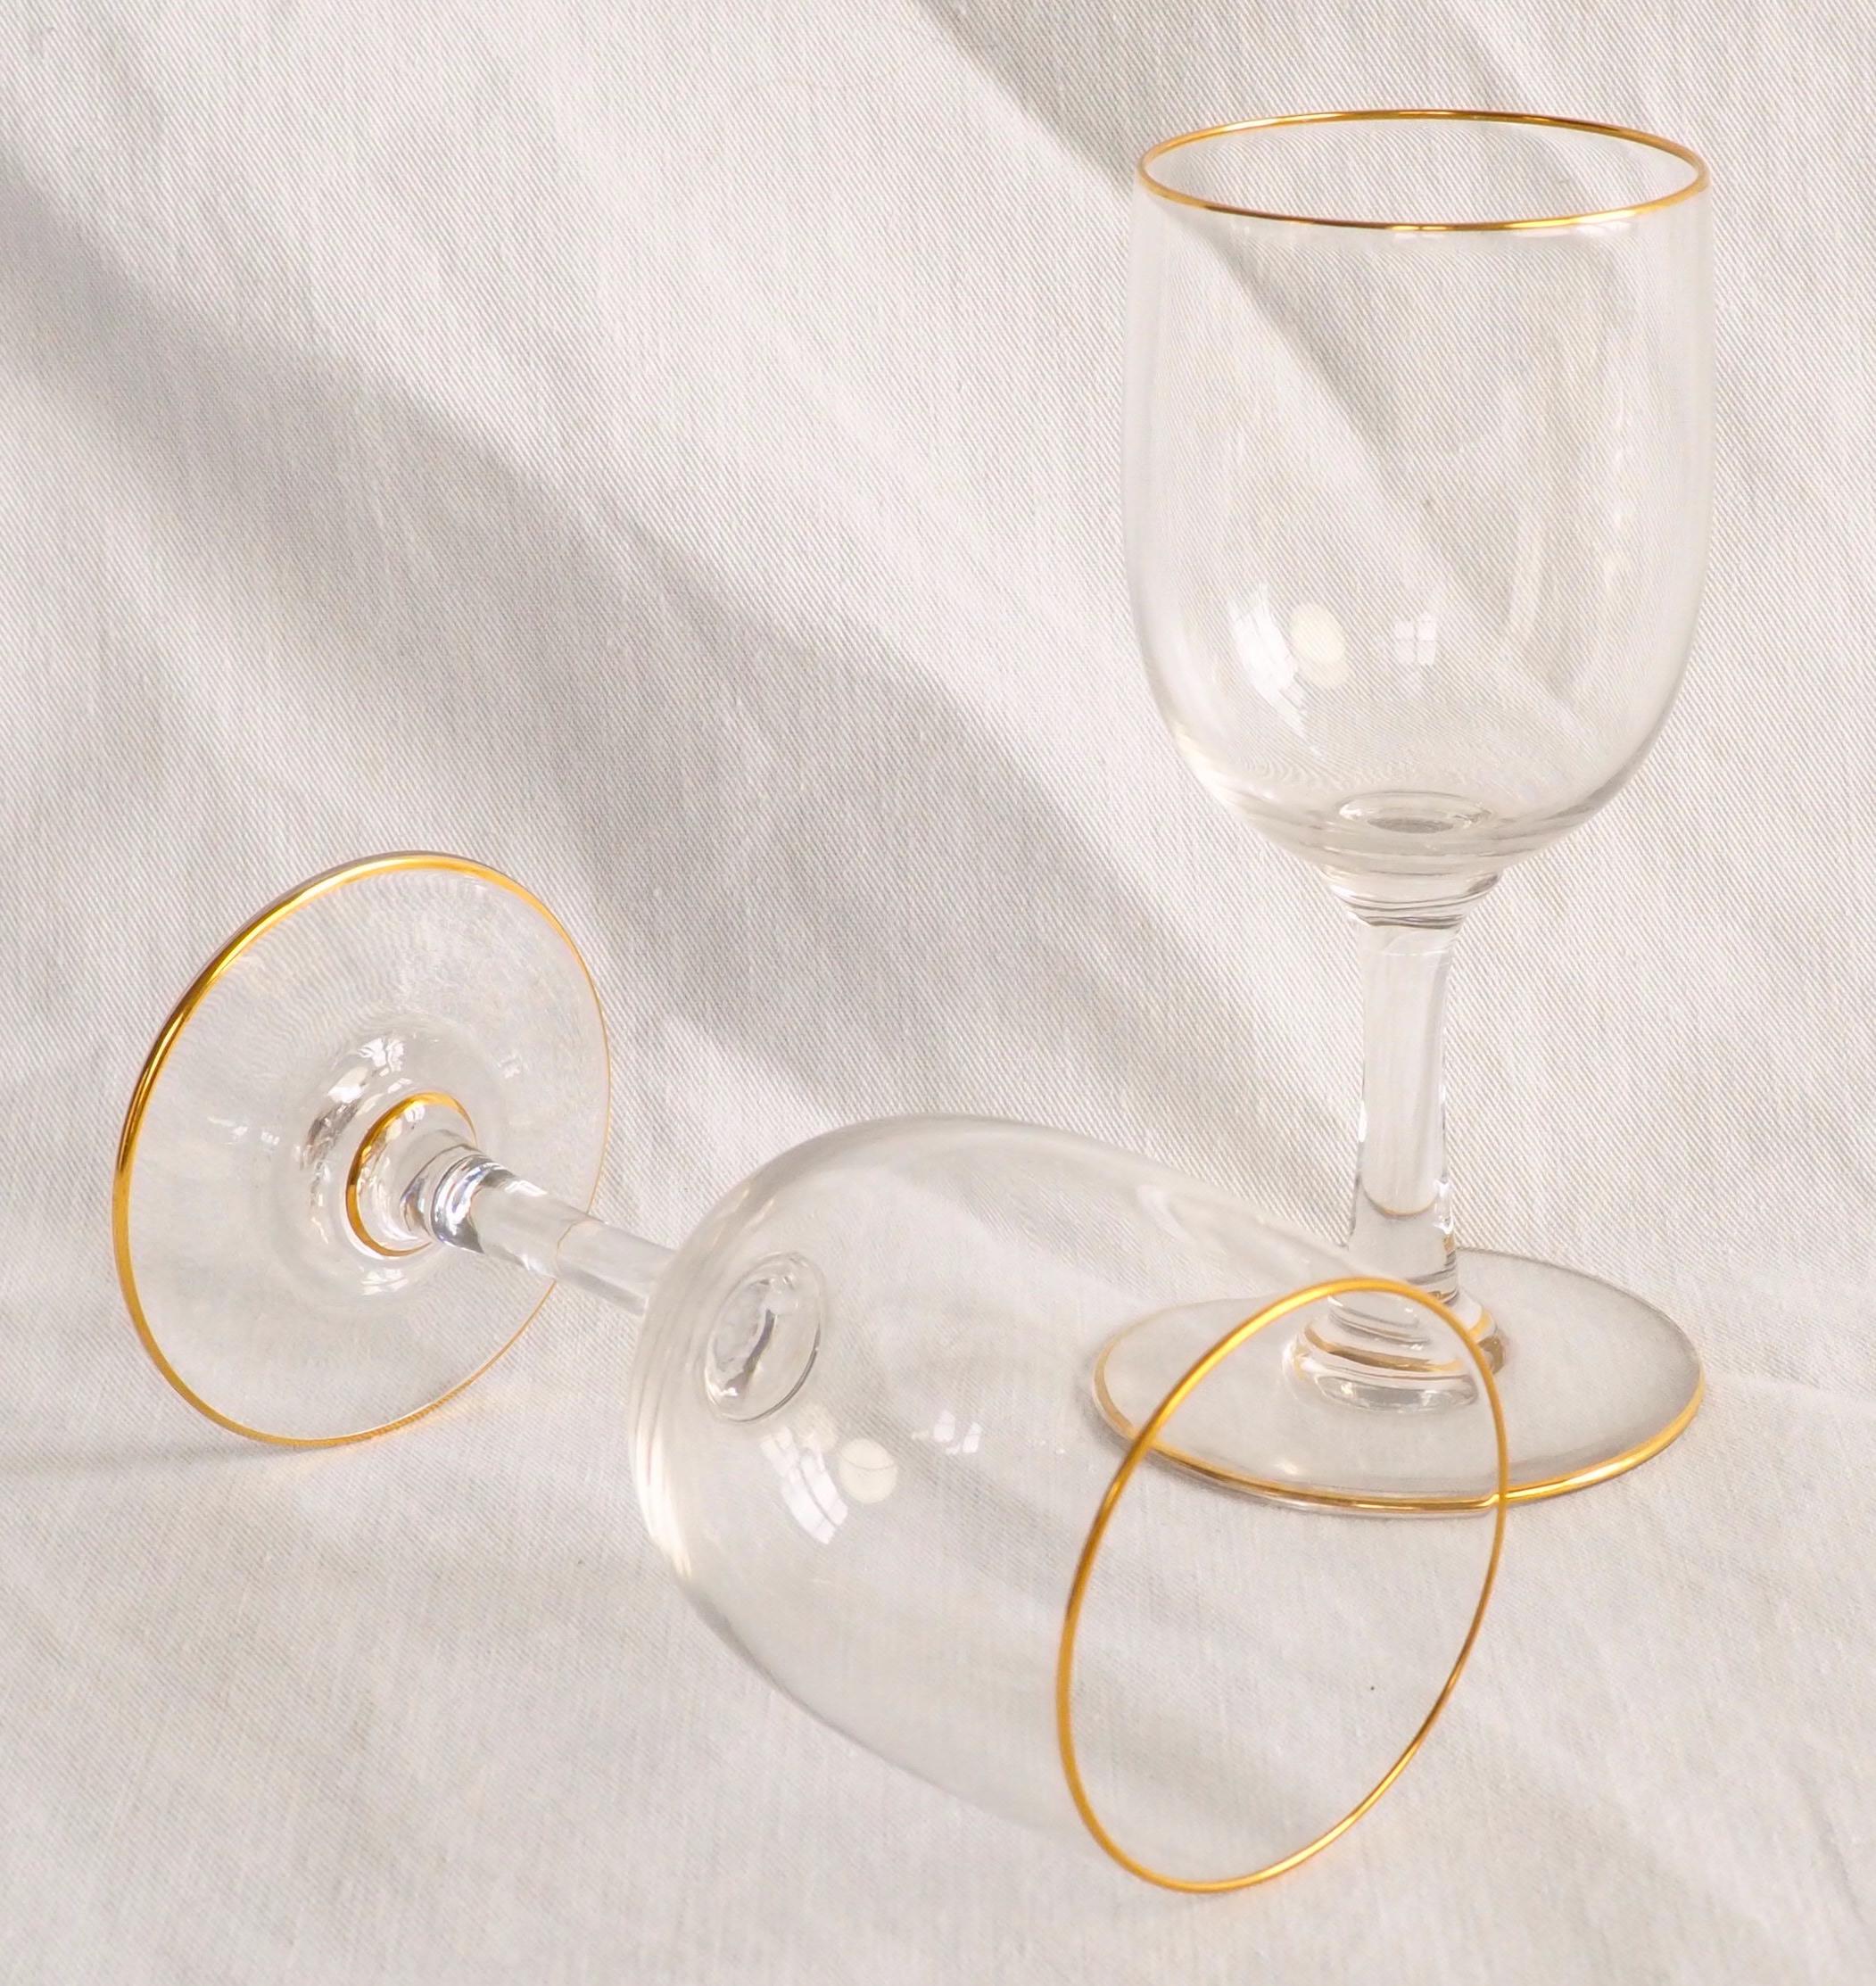 Set of 3 Baccarat crystal glasses - France - Perfection model enhanced with gold 3